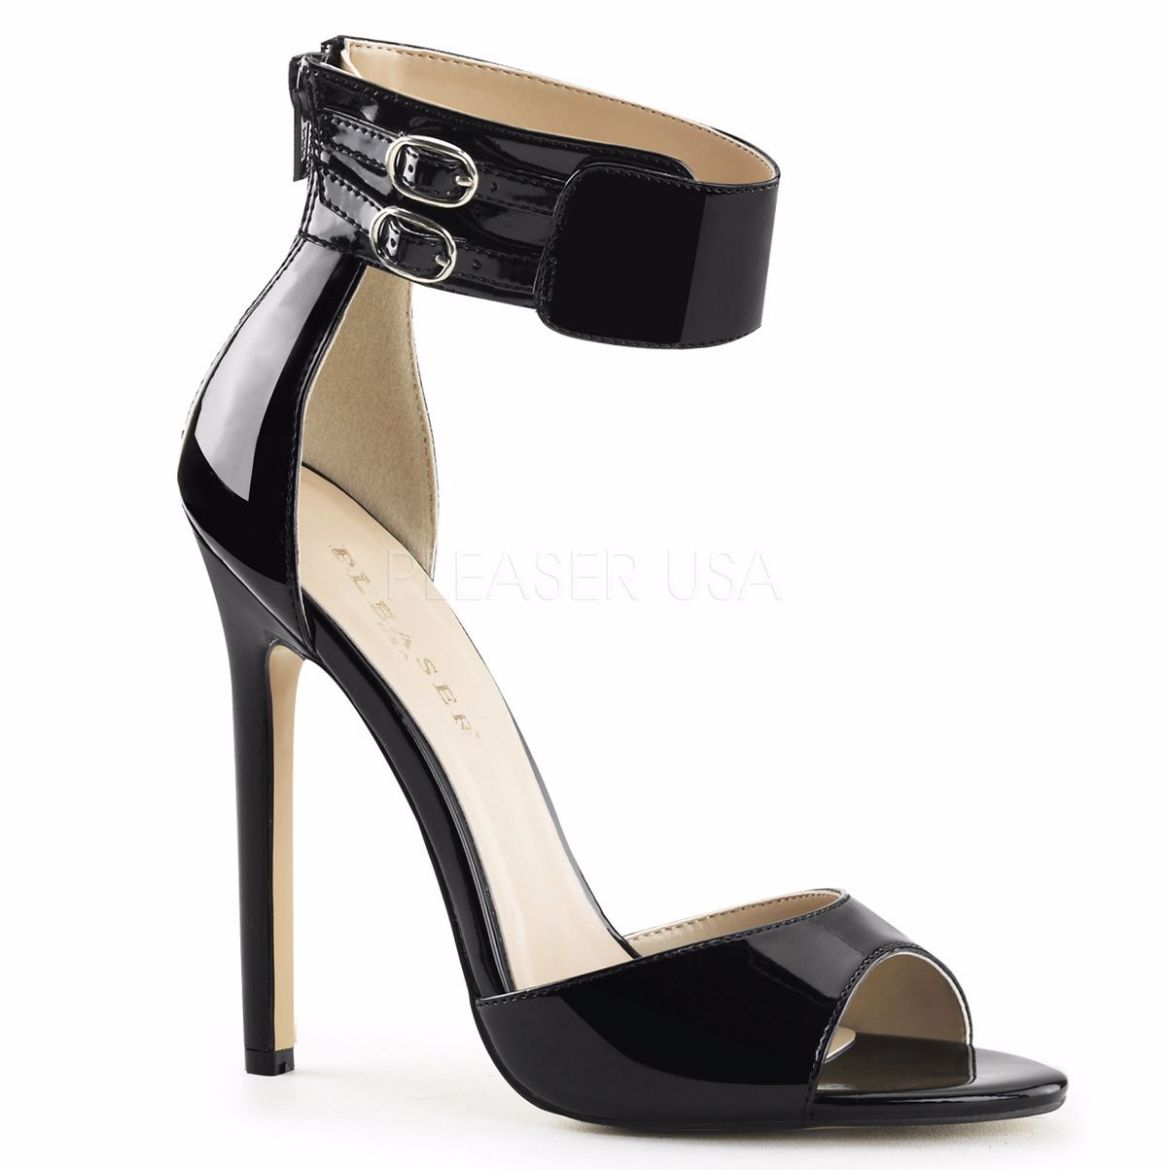 Product image of Pleaser Sexy-19 Black Patent, 5 inch (12.7 cm) Heel Sandal Shoes